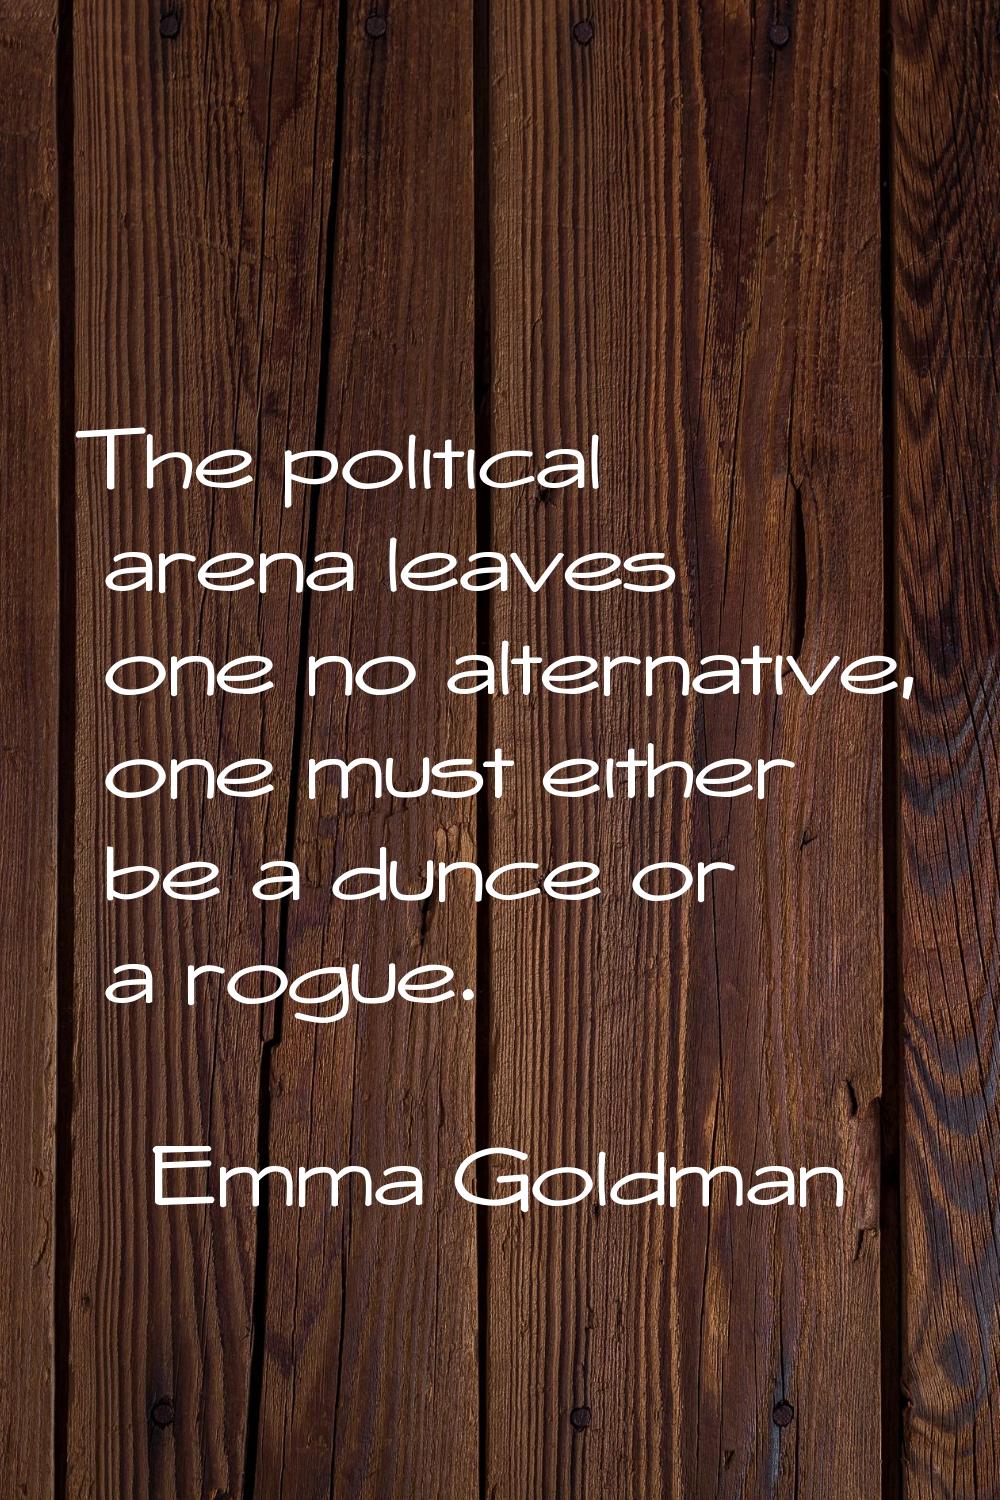 The political arena leaves one no alternative, one must either be a dunce or a rogue.